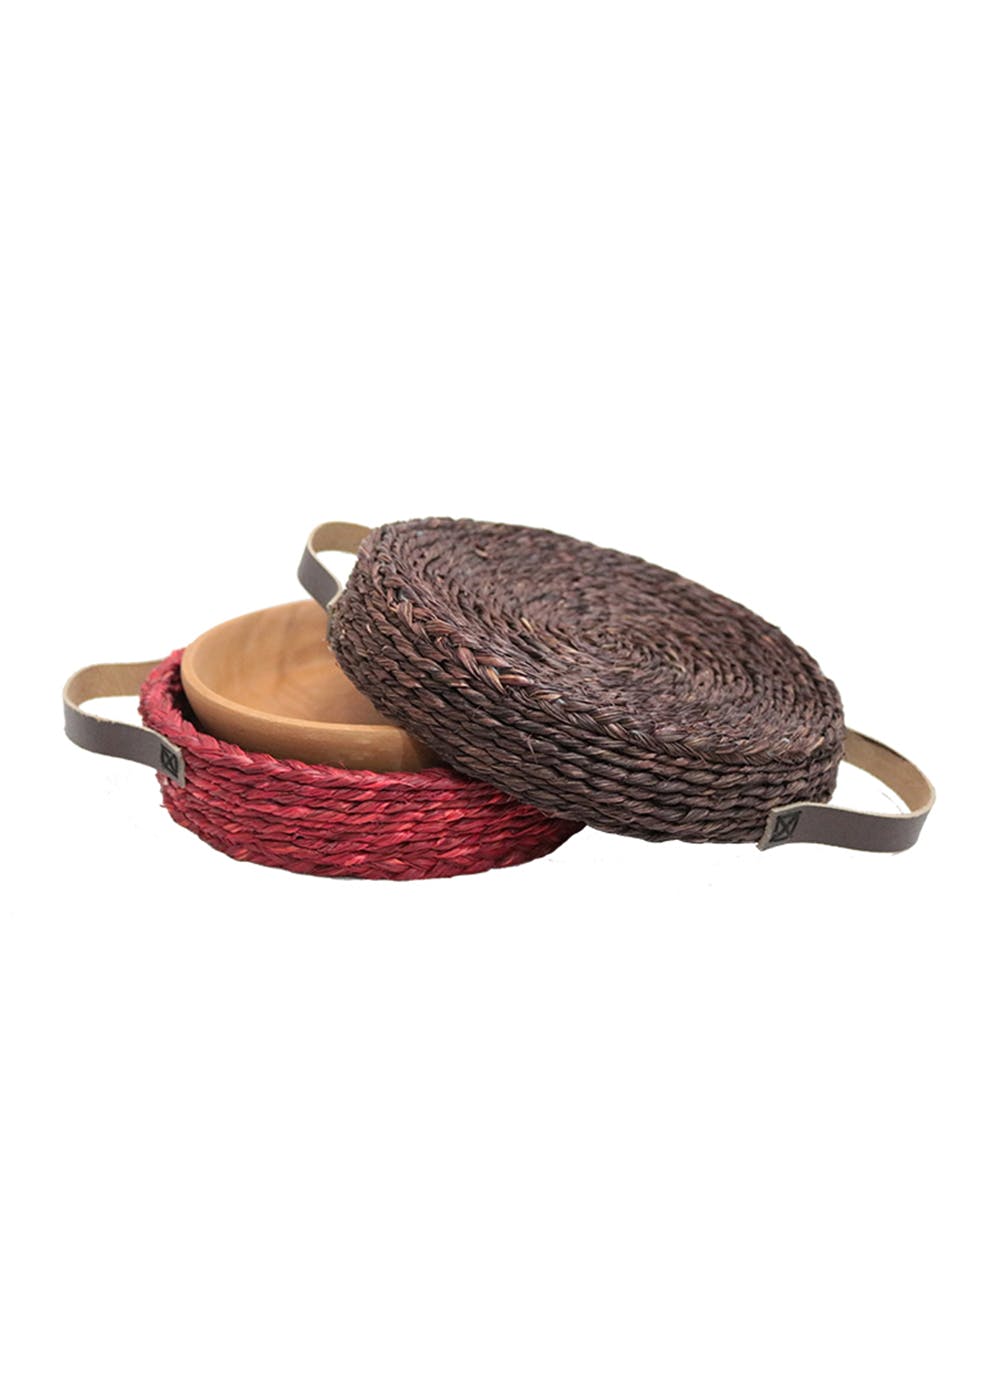 Handmade Mitti Bakeware with Sabaii Baskets (Red and Brown)